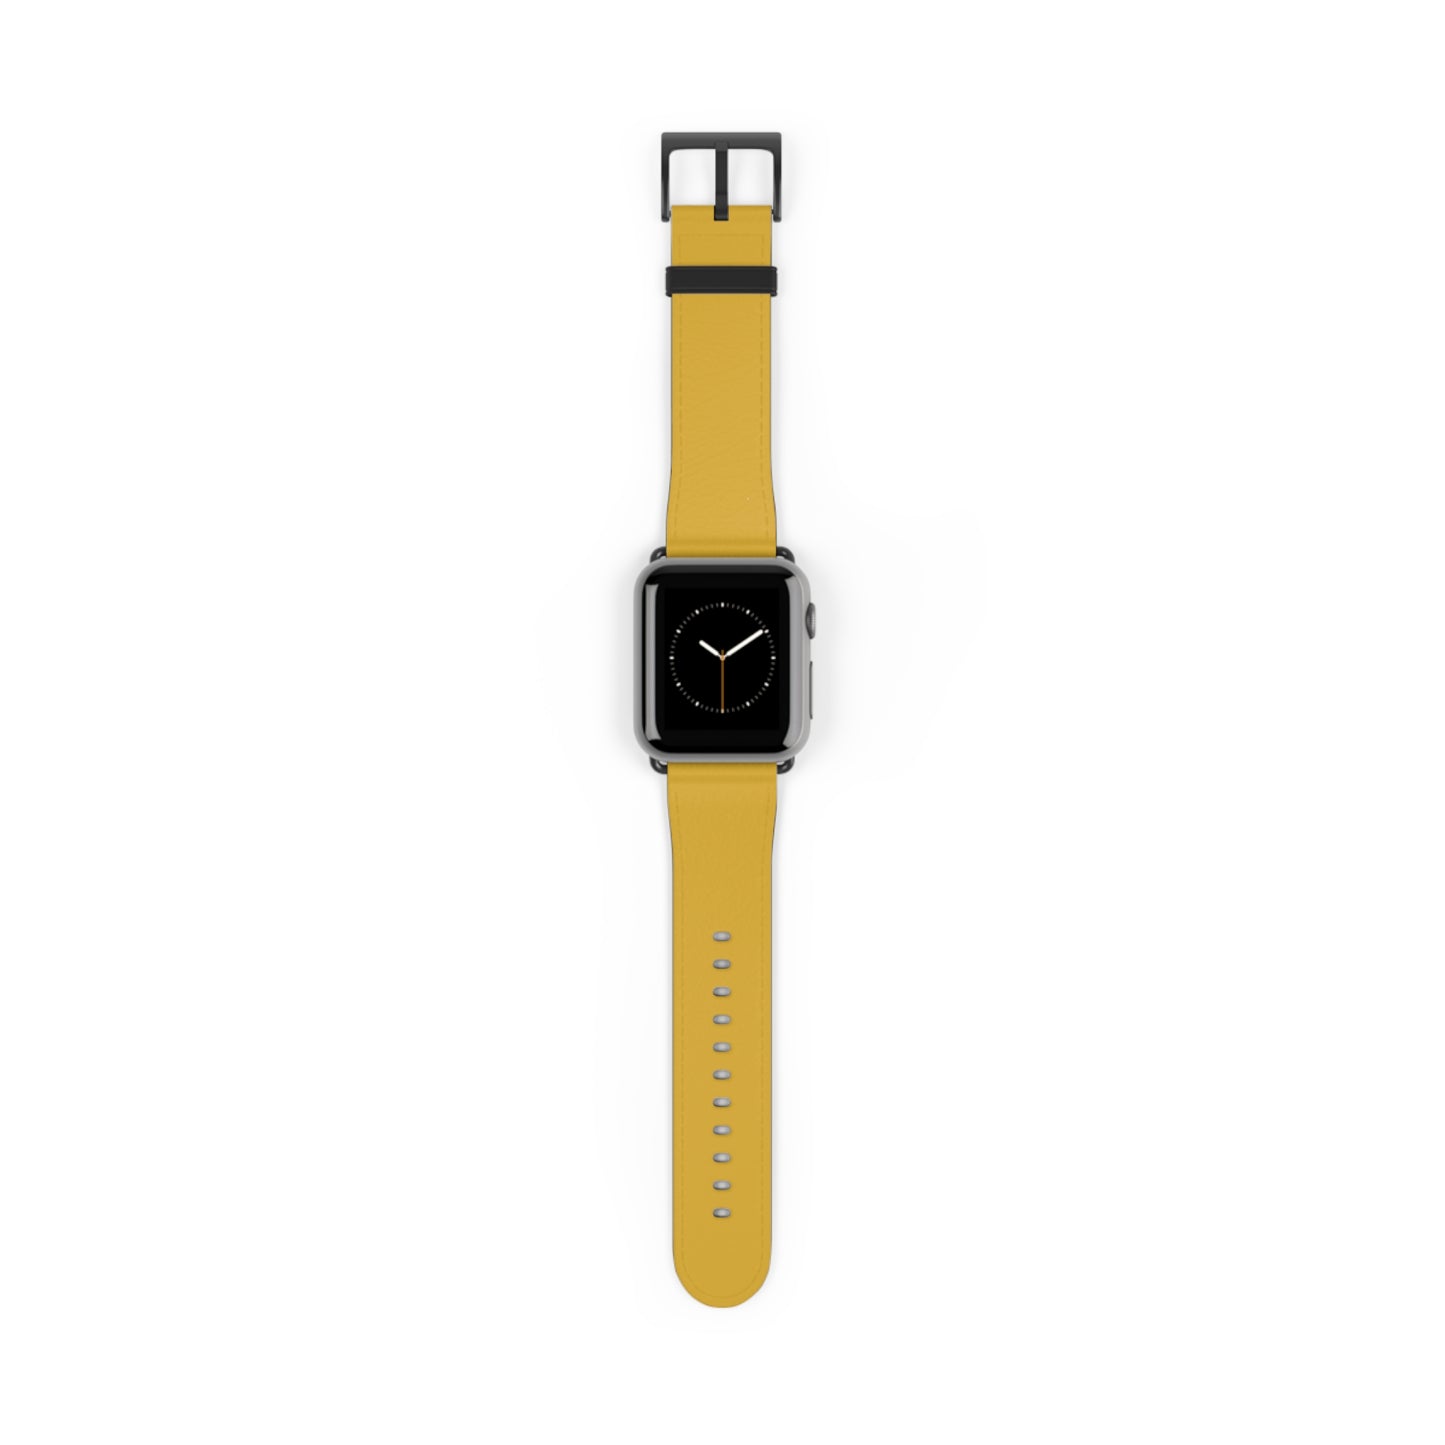 SOLID COLOR YELLOW APPLE® WATCH BAND- PANTONE® 110